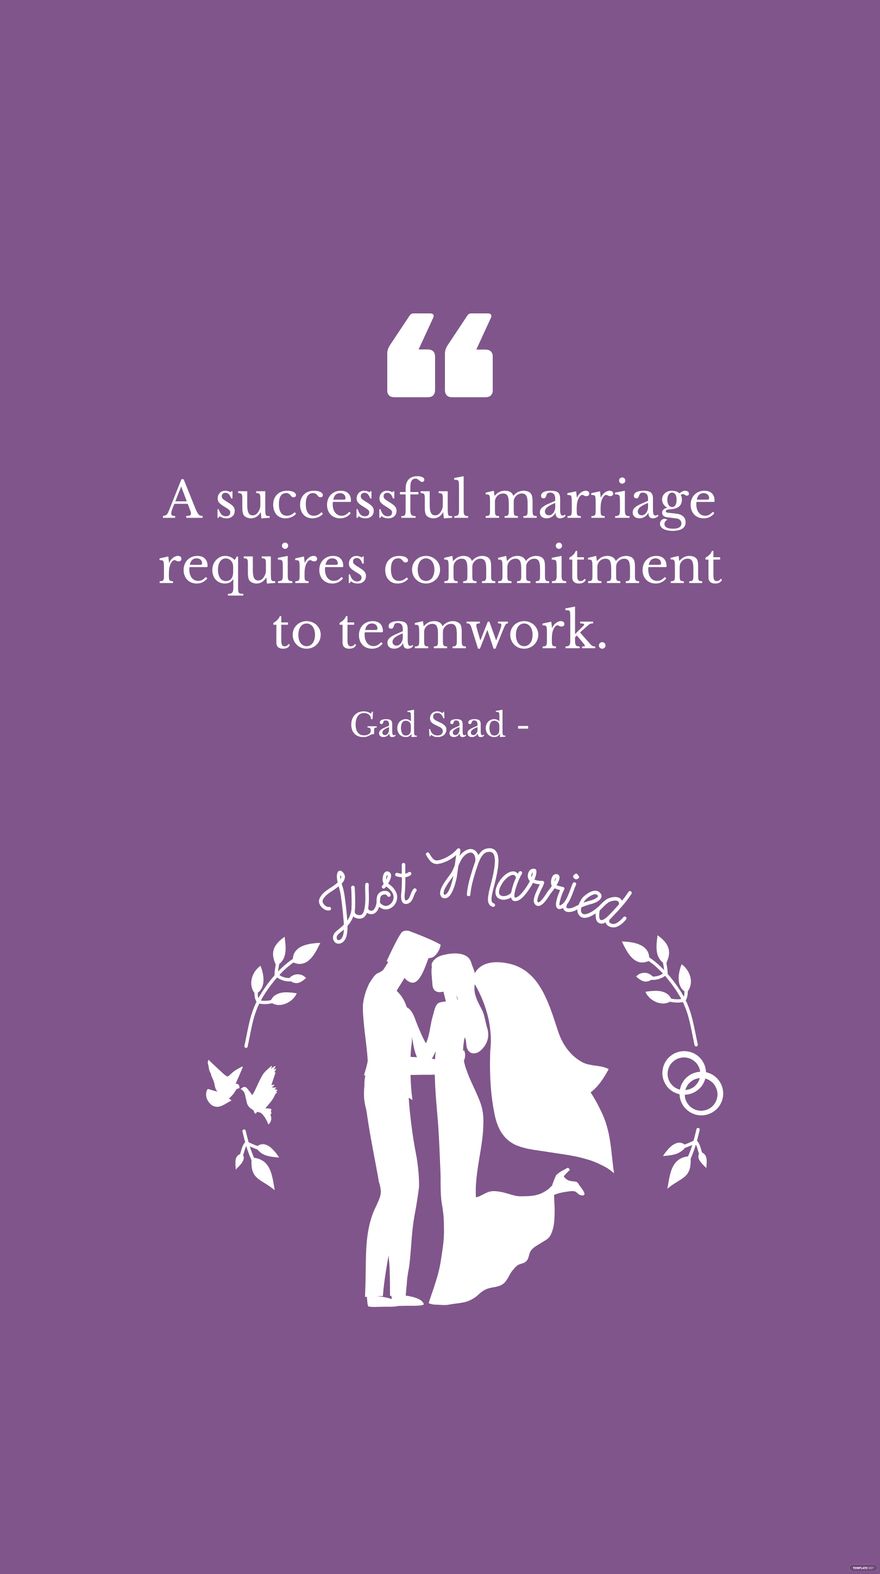 Free Gad Saad - A successful marriage requires commitment to teamwork.